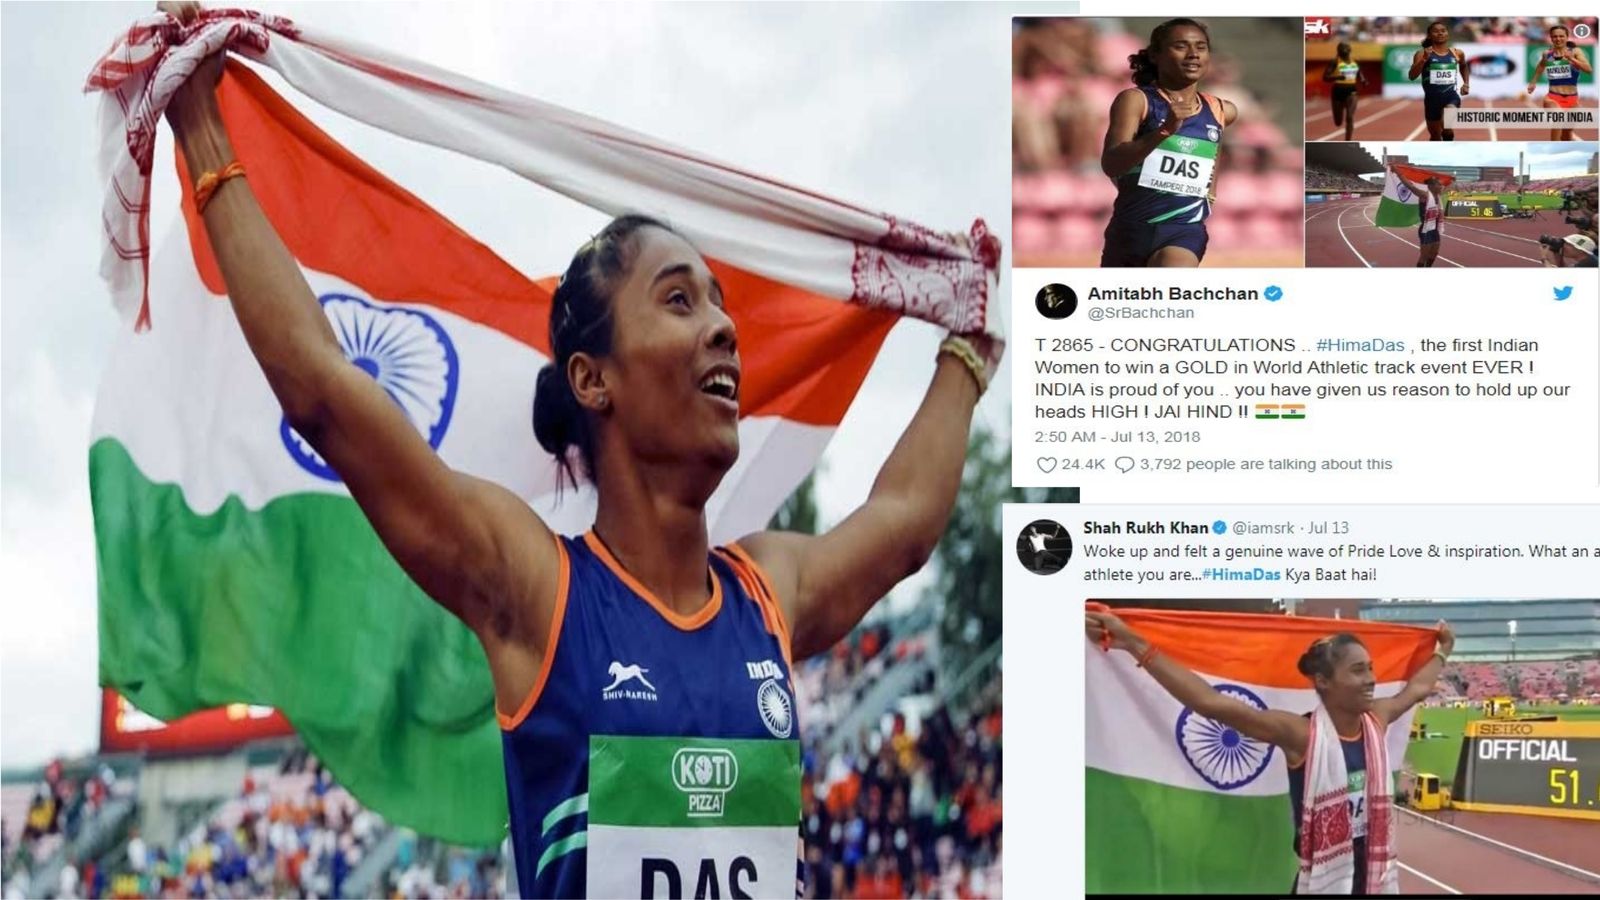 Bollywood Floods Twitter With Love For Hima Das, India's Golden Girl Of The Hour